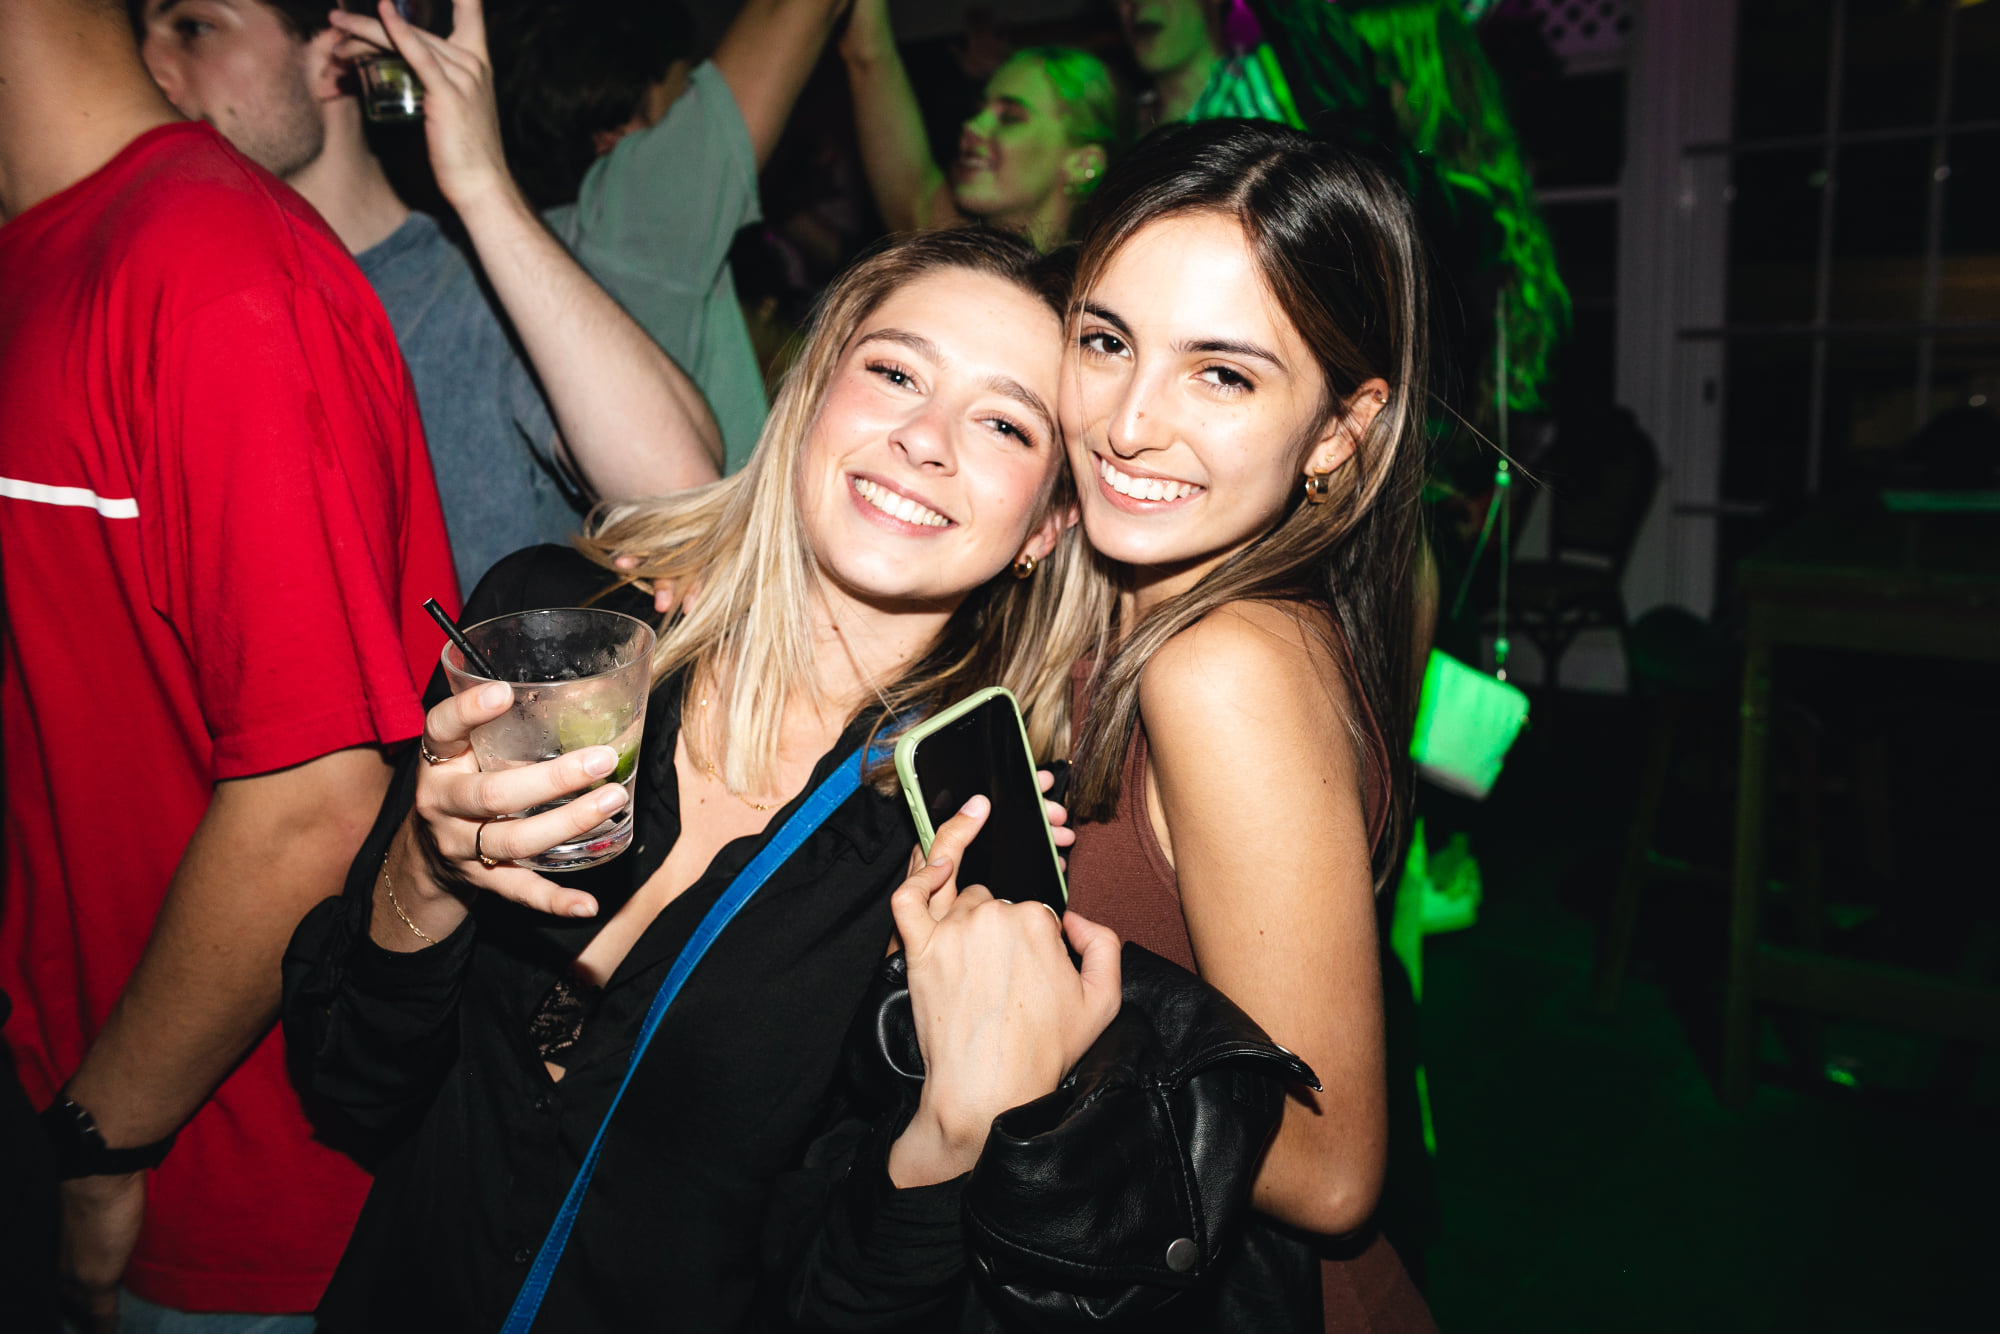 NSW to continue COVID-19 restrictions until February 28 in another blow for inner city nightlife